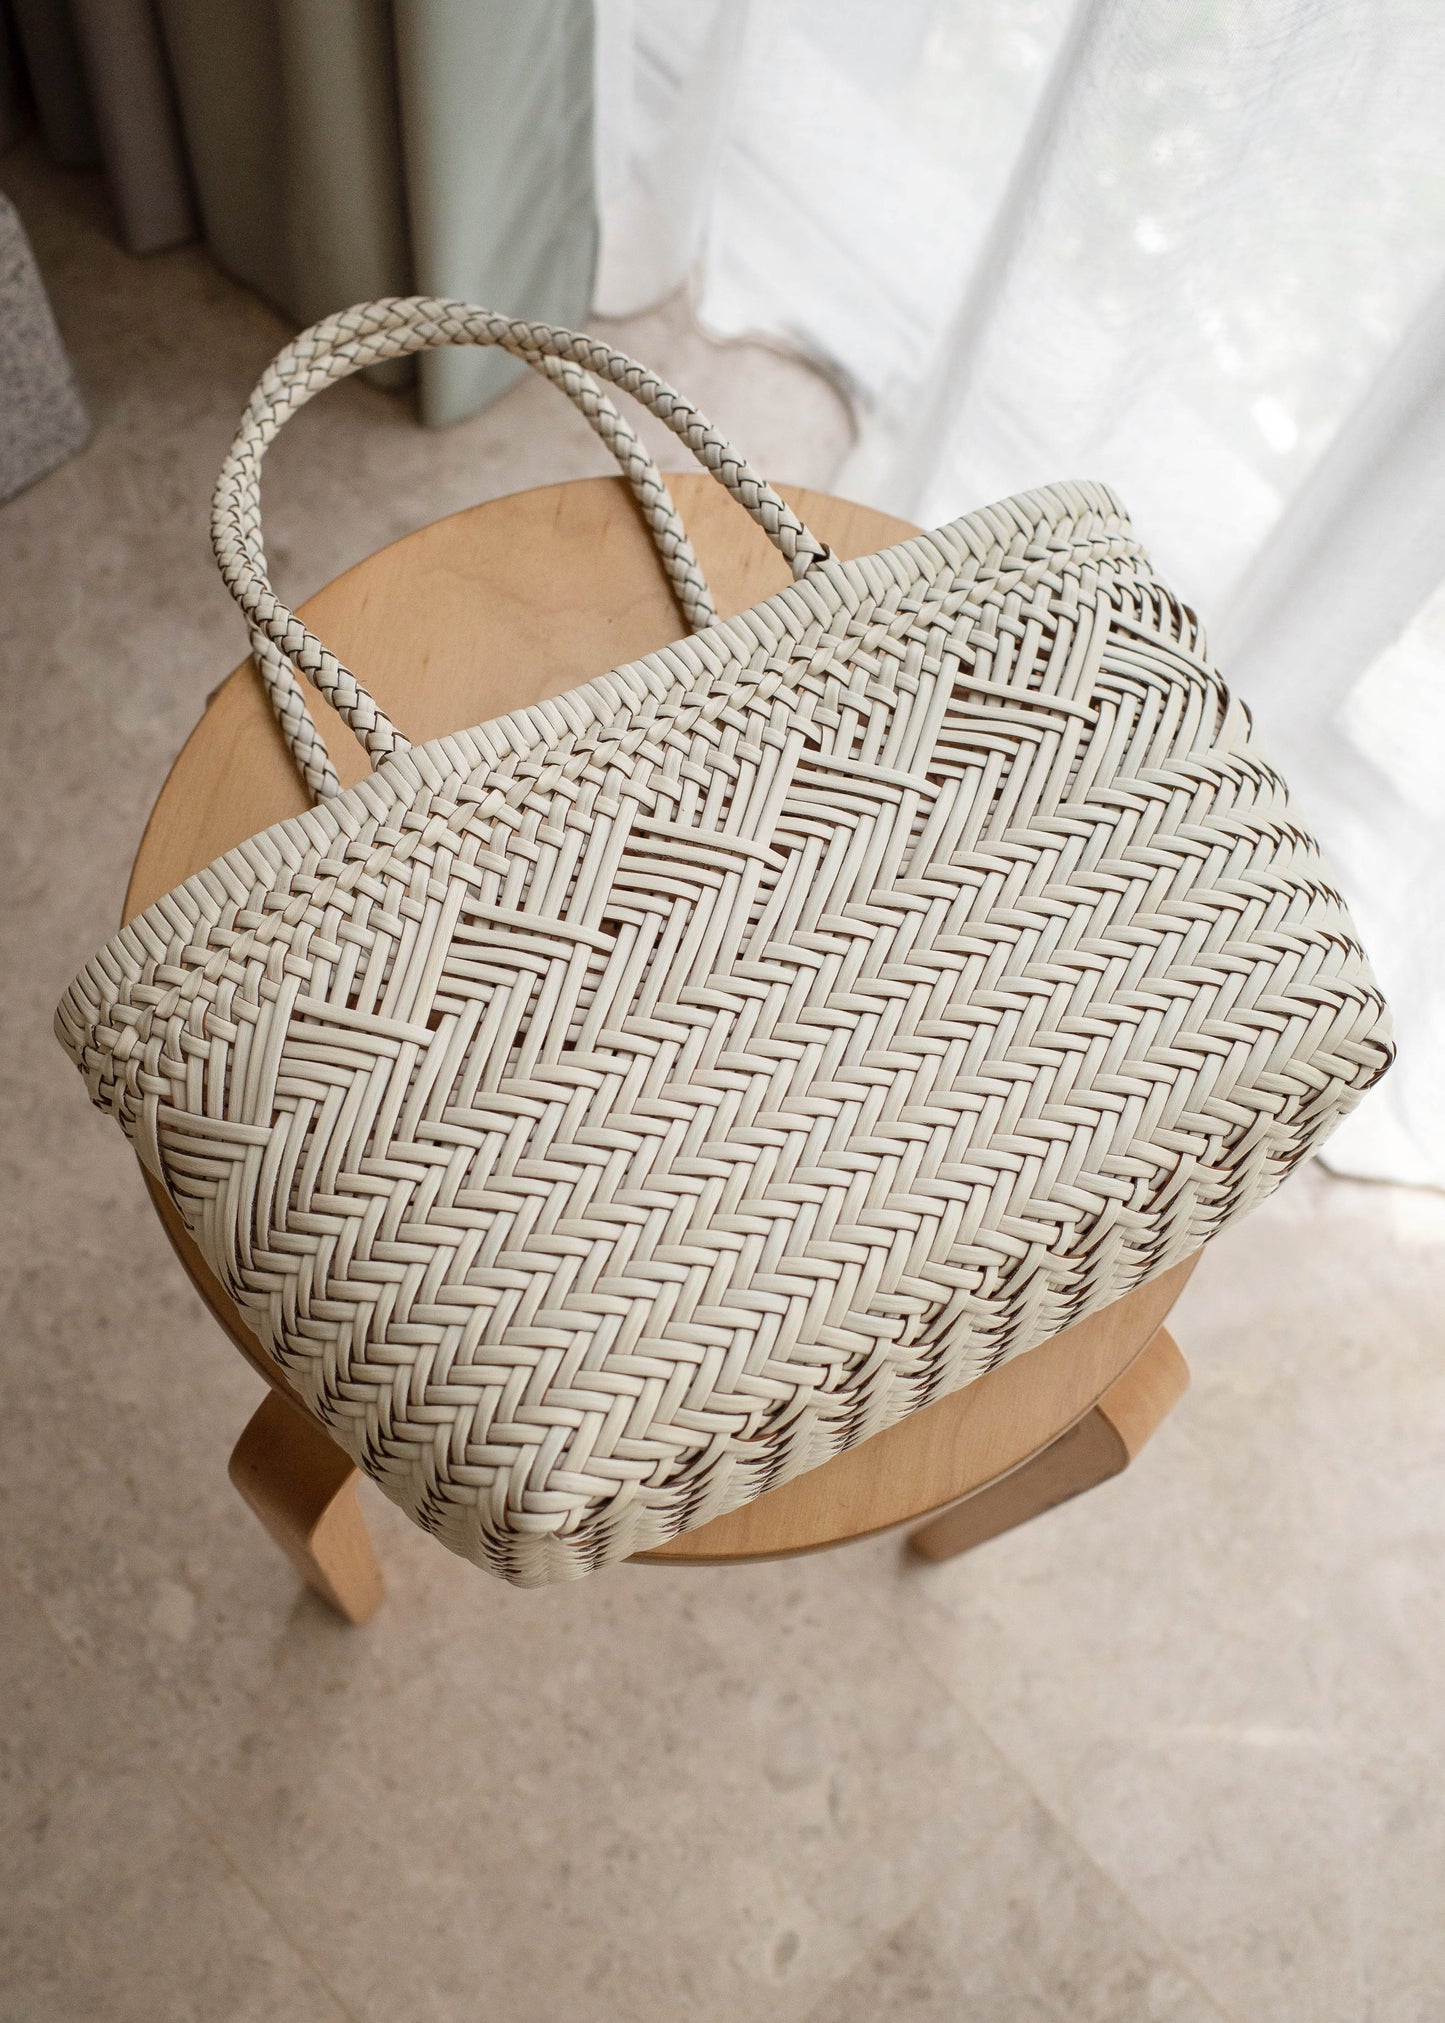 Woven leather bag